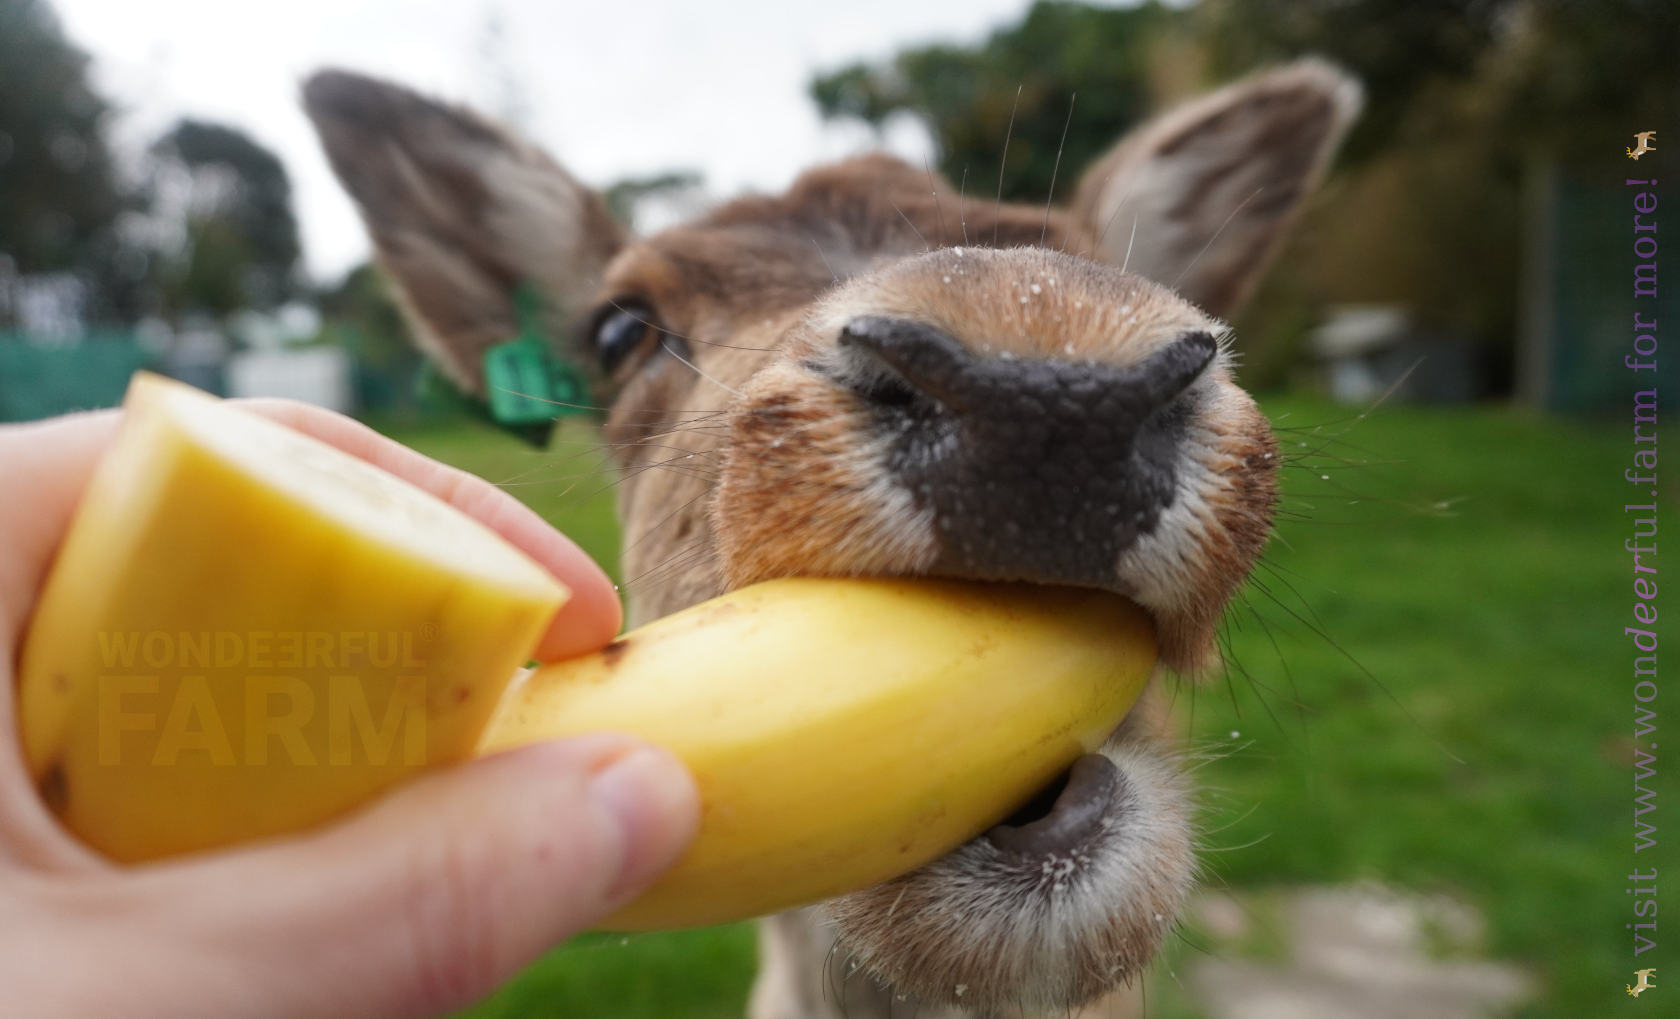 deer taking a banana from hand